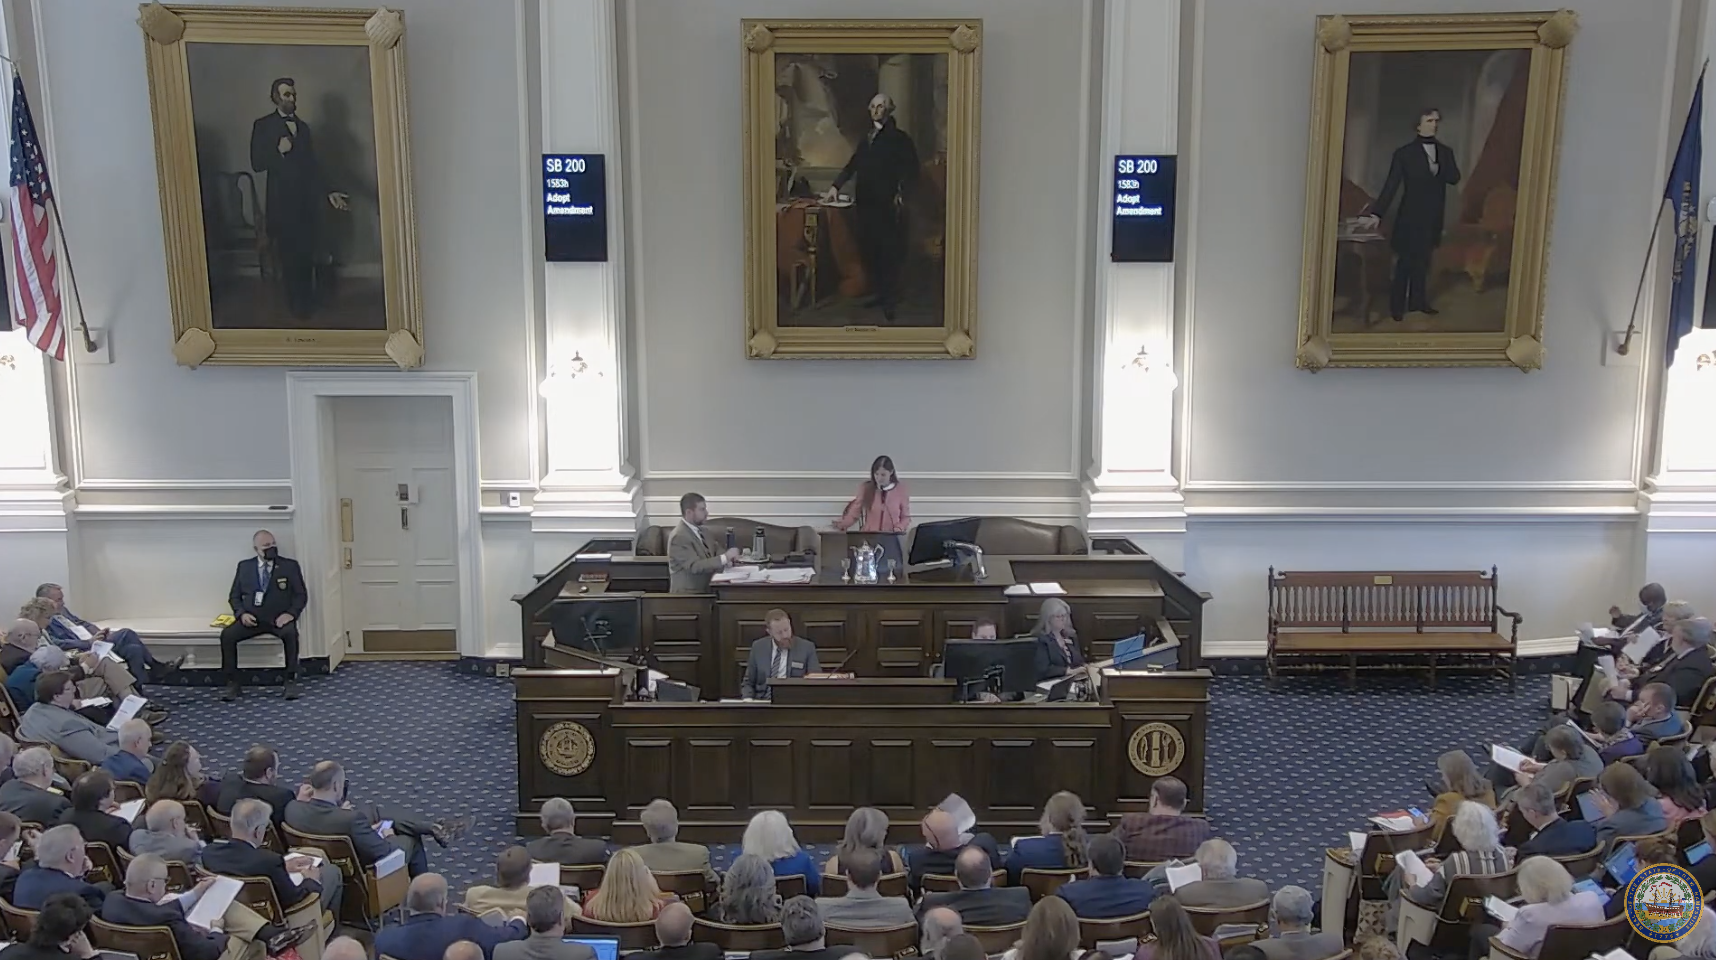 An amendment to SB 200 was proposed in the New Hampshire House to delay mRNA vaccines by two years, which was denied with a vote of 105-275. 